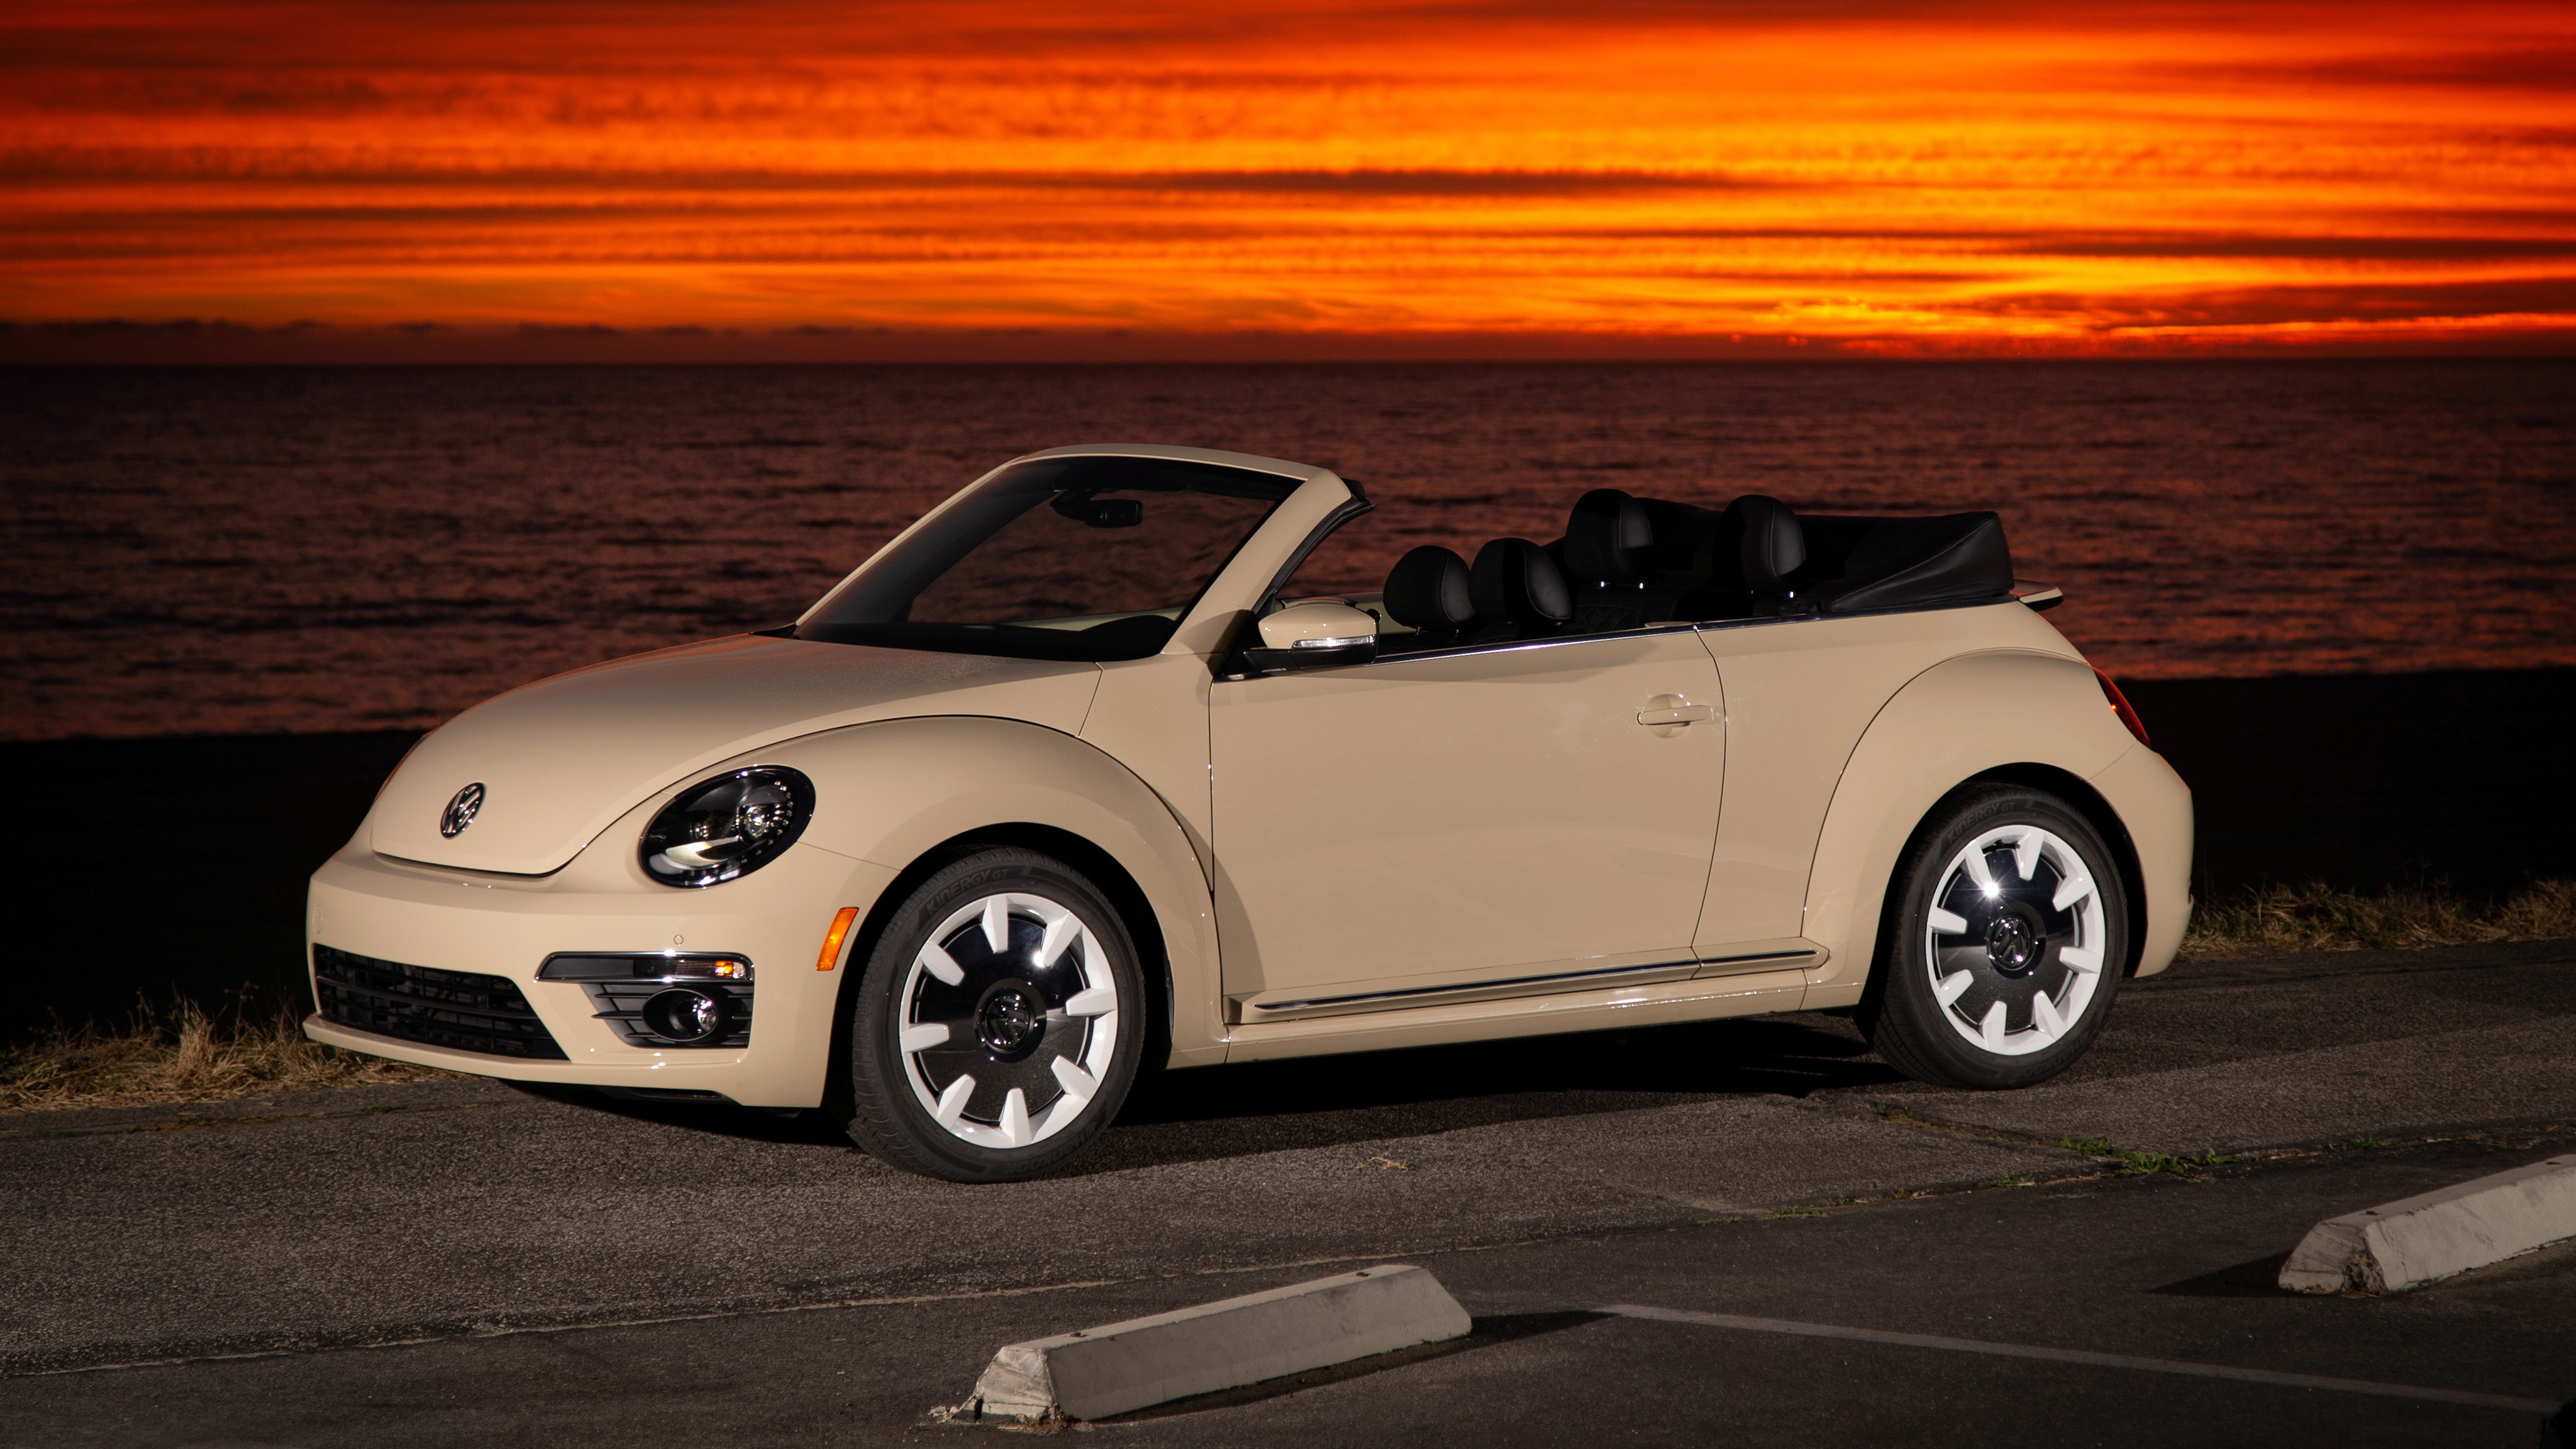 Share 72+ beetle wallpaper latest - in.cdgdbentre